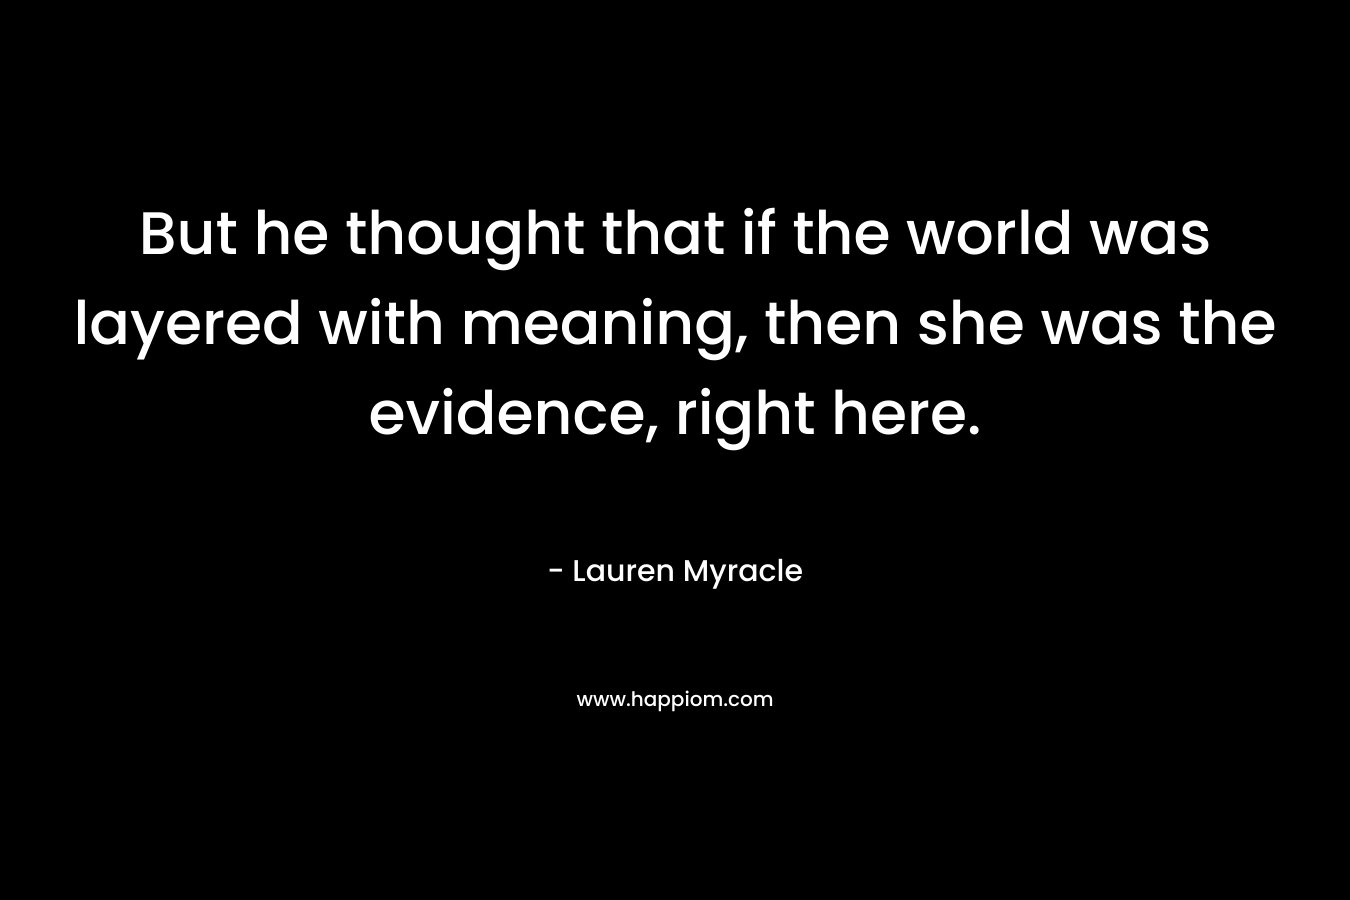 But he thought that if the world was layered with meaning, then she was the evidence, right here.